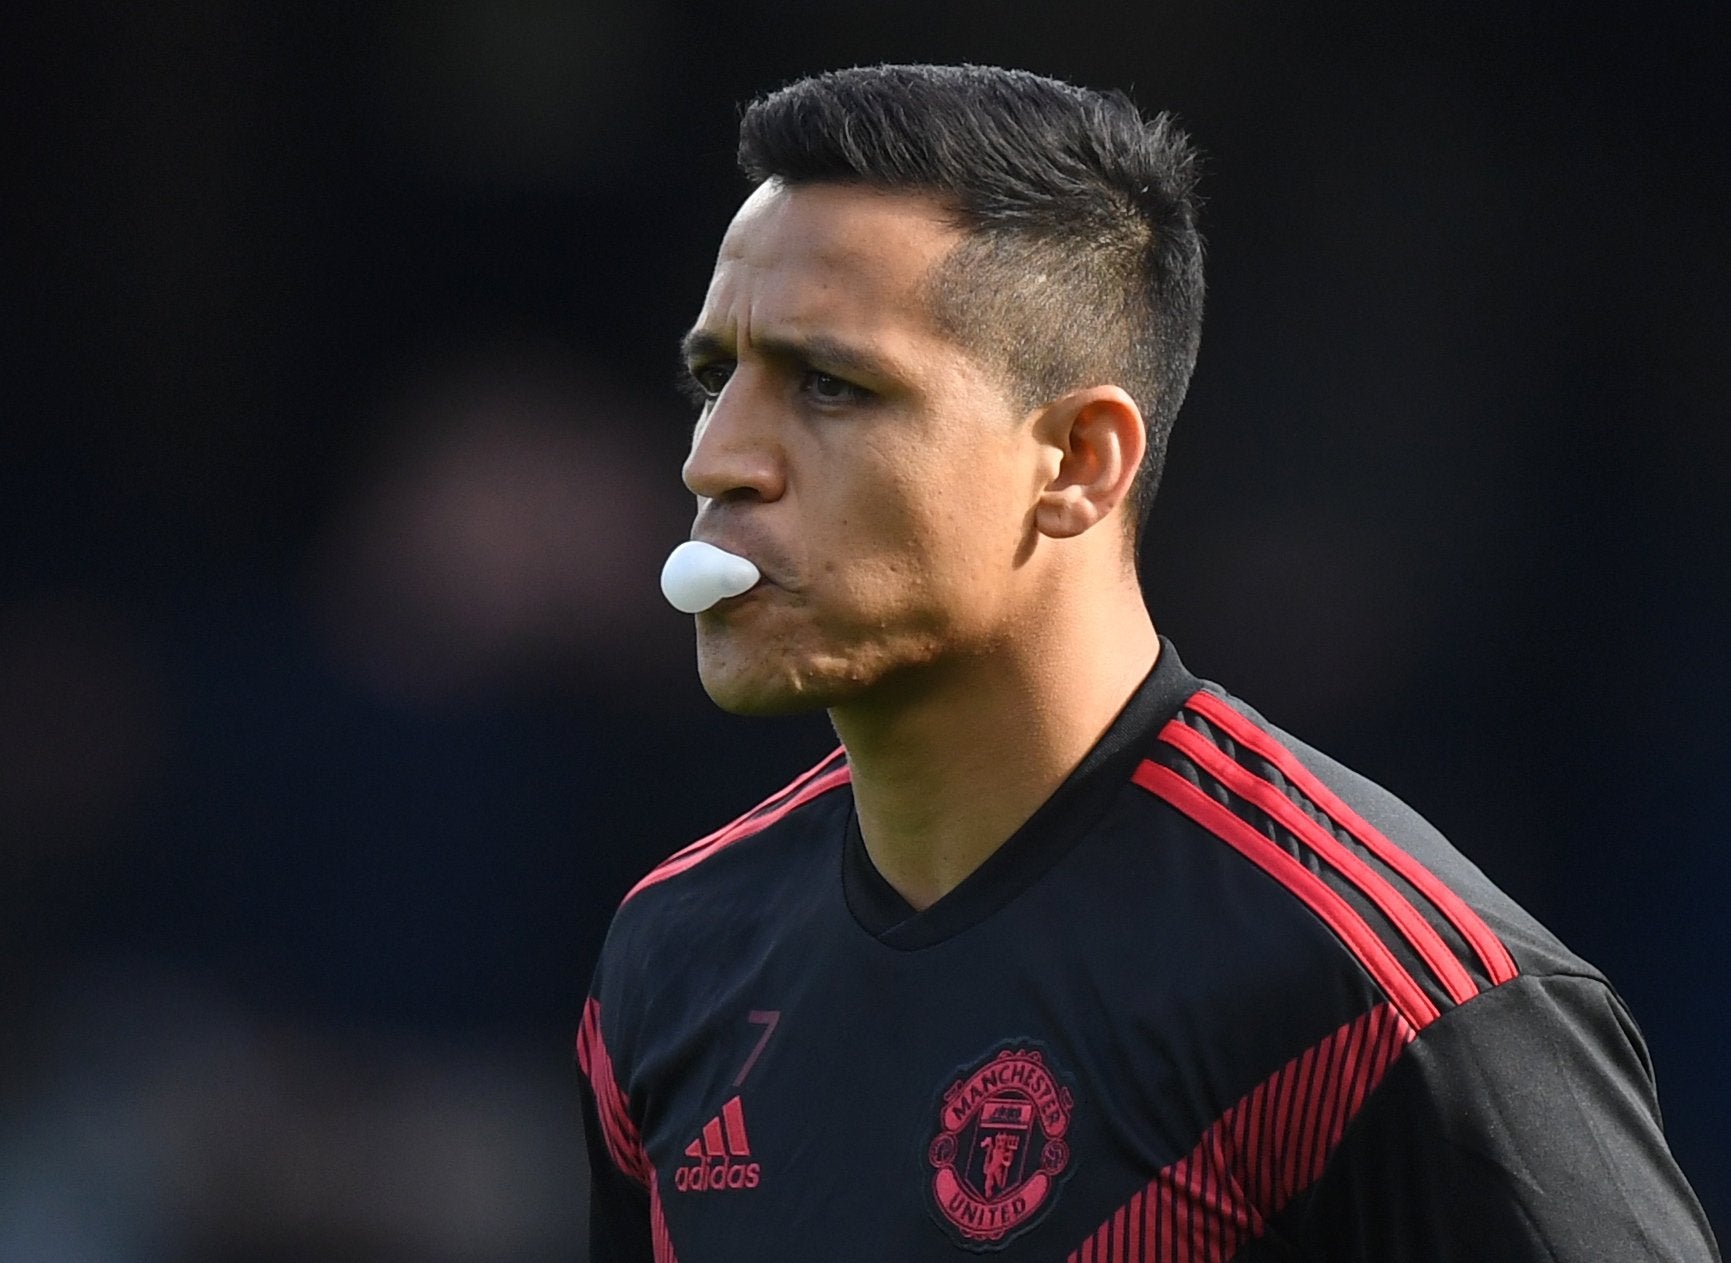 Sanchez has reportedly found it hard to settle in Manchester